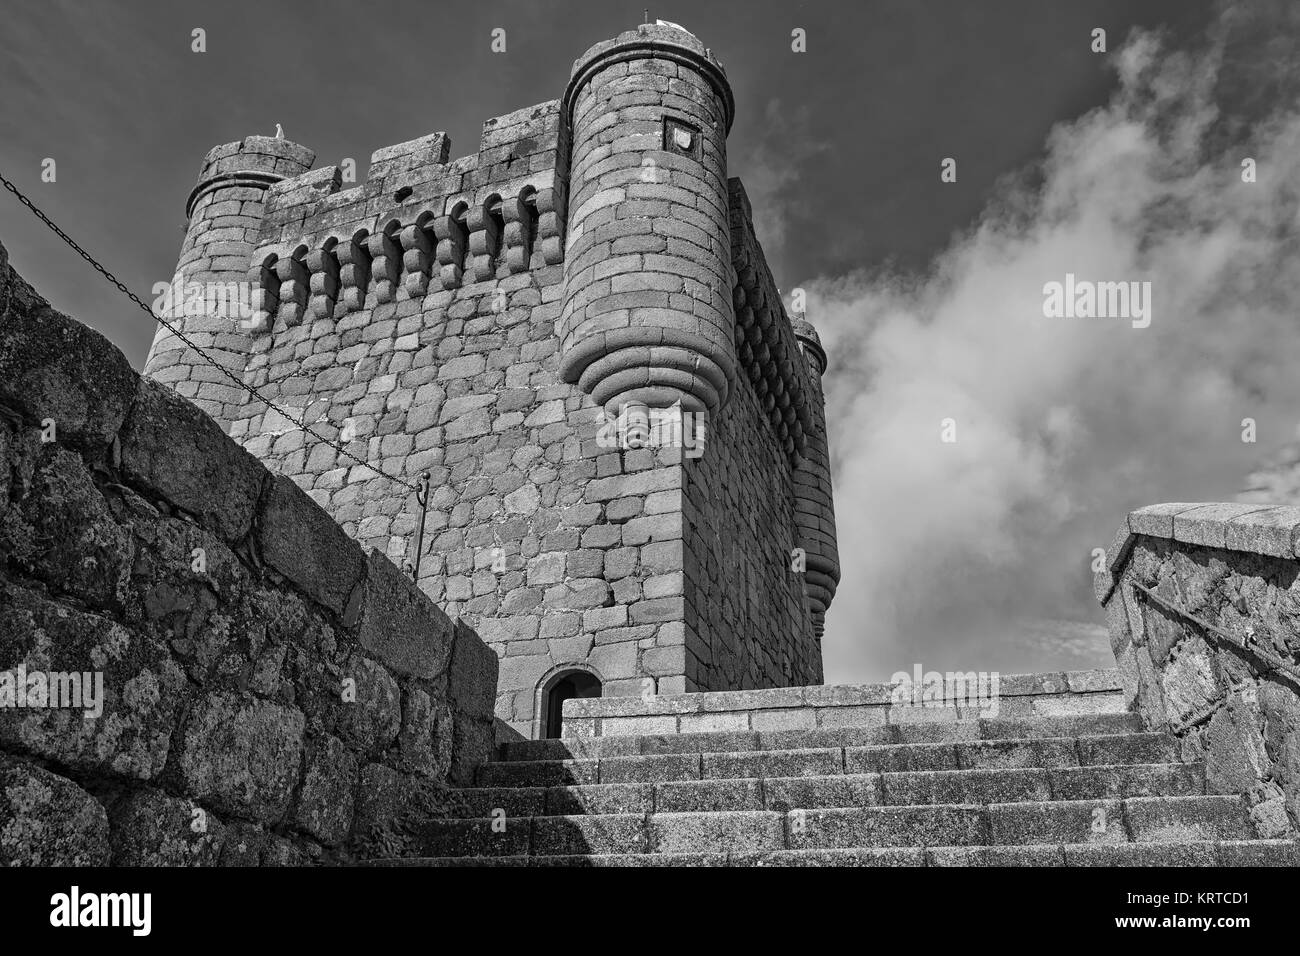 Detail of a medieval tower of homage. Stock Photo